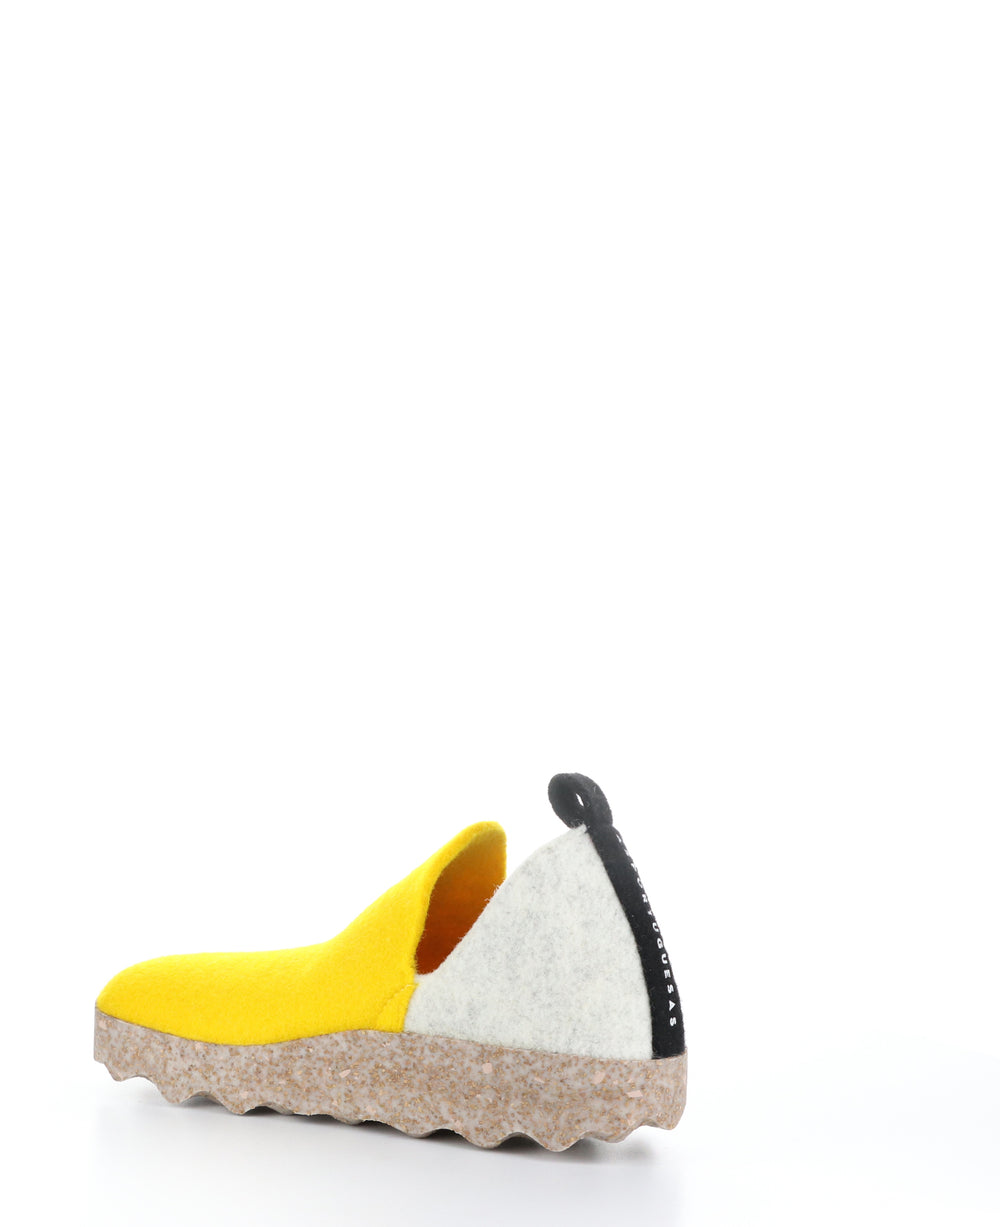 CITY086ASP Yellow/Owht/Blk Round Toe Shoes|CITY086ASP Chaussures à Bout Rond in Jaune